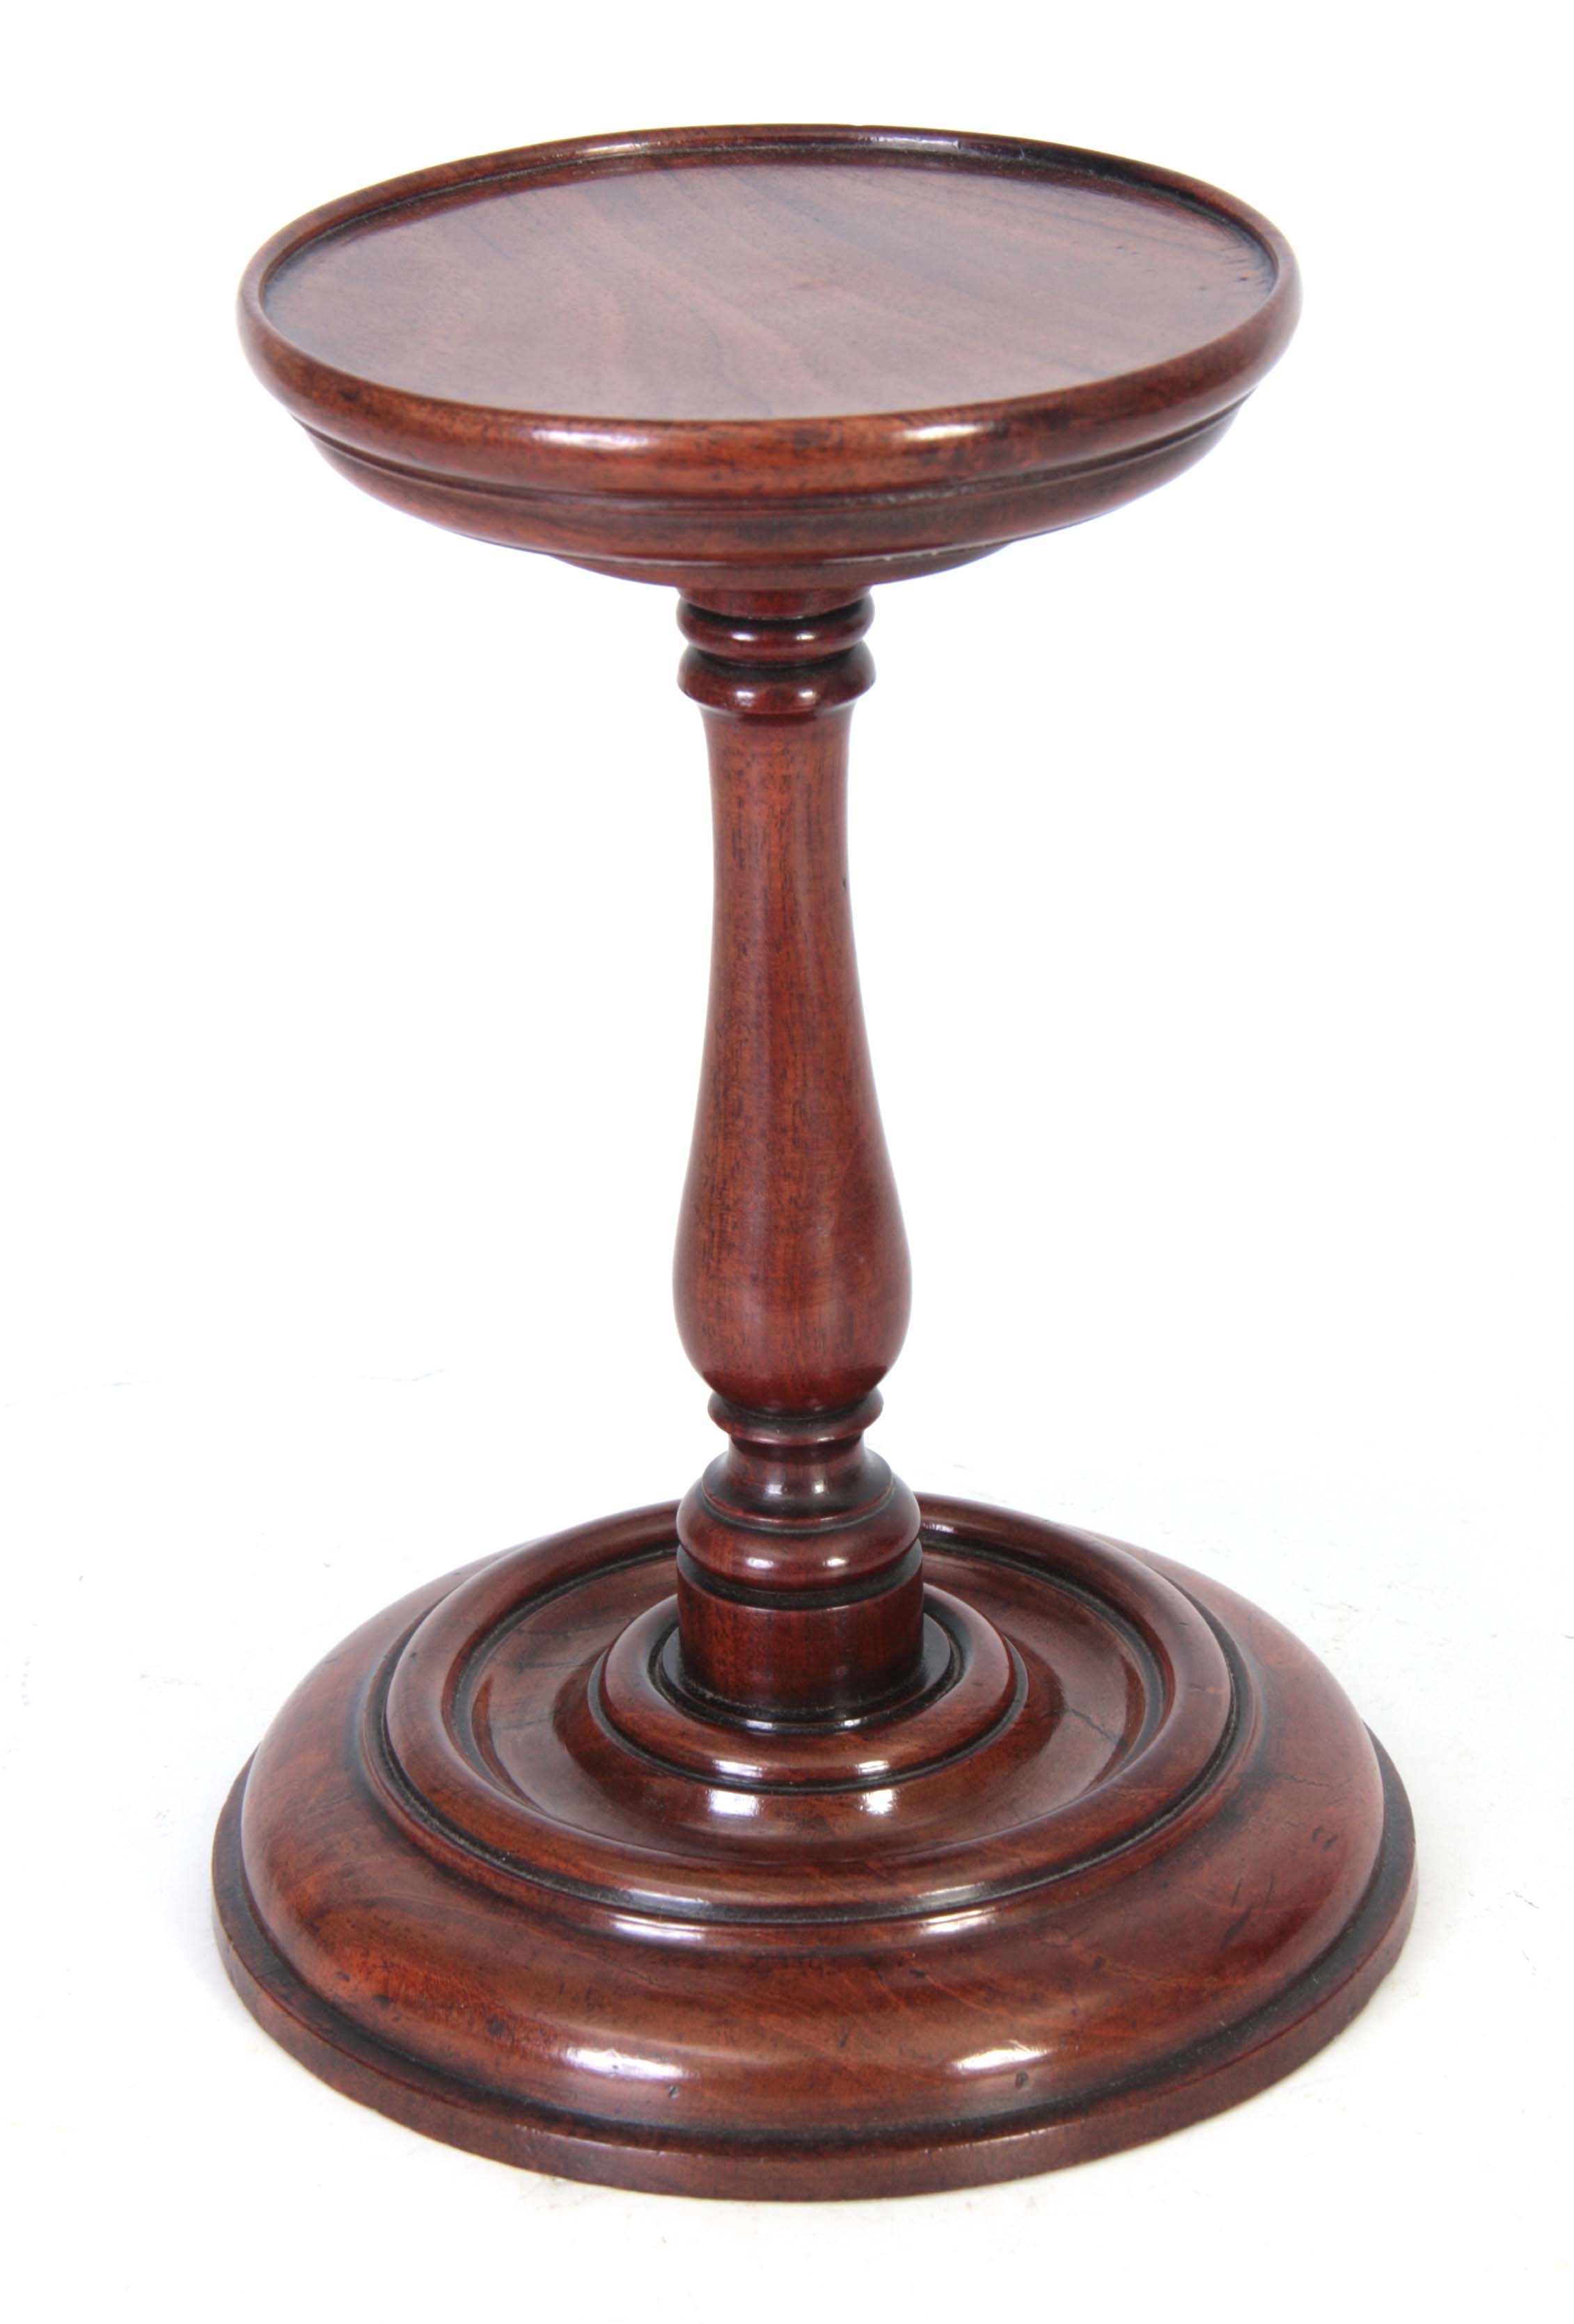 AN 18TH CENTURY MAHOGANY TURNED CANDLE STAND with ring turned bulbous stem and moulded base 22cm